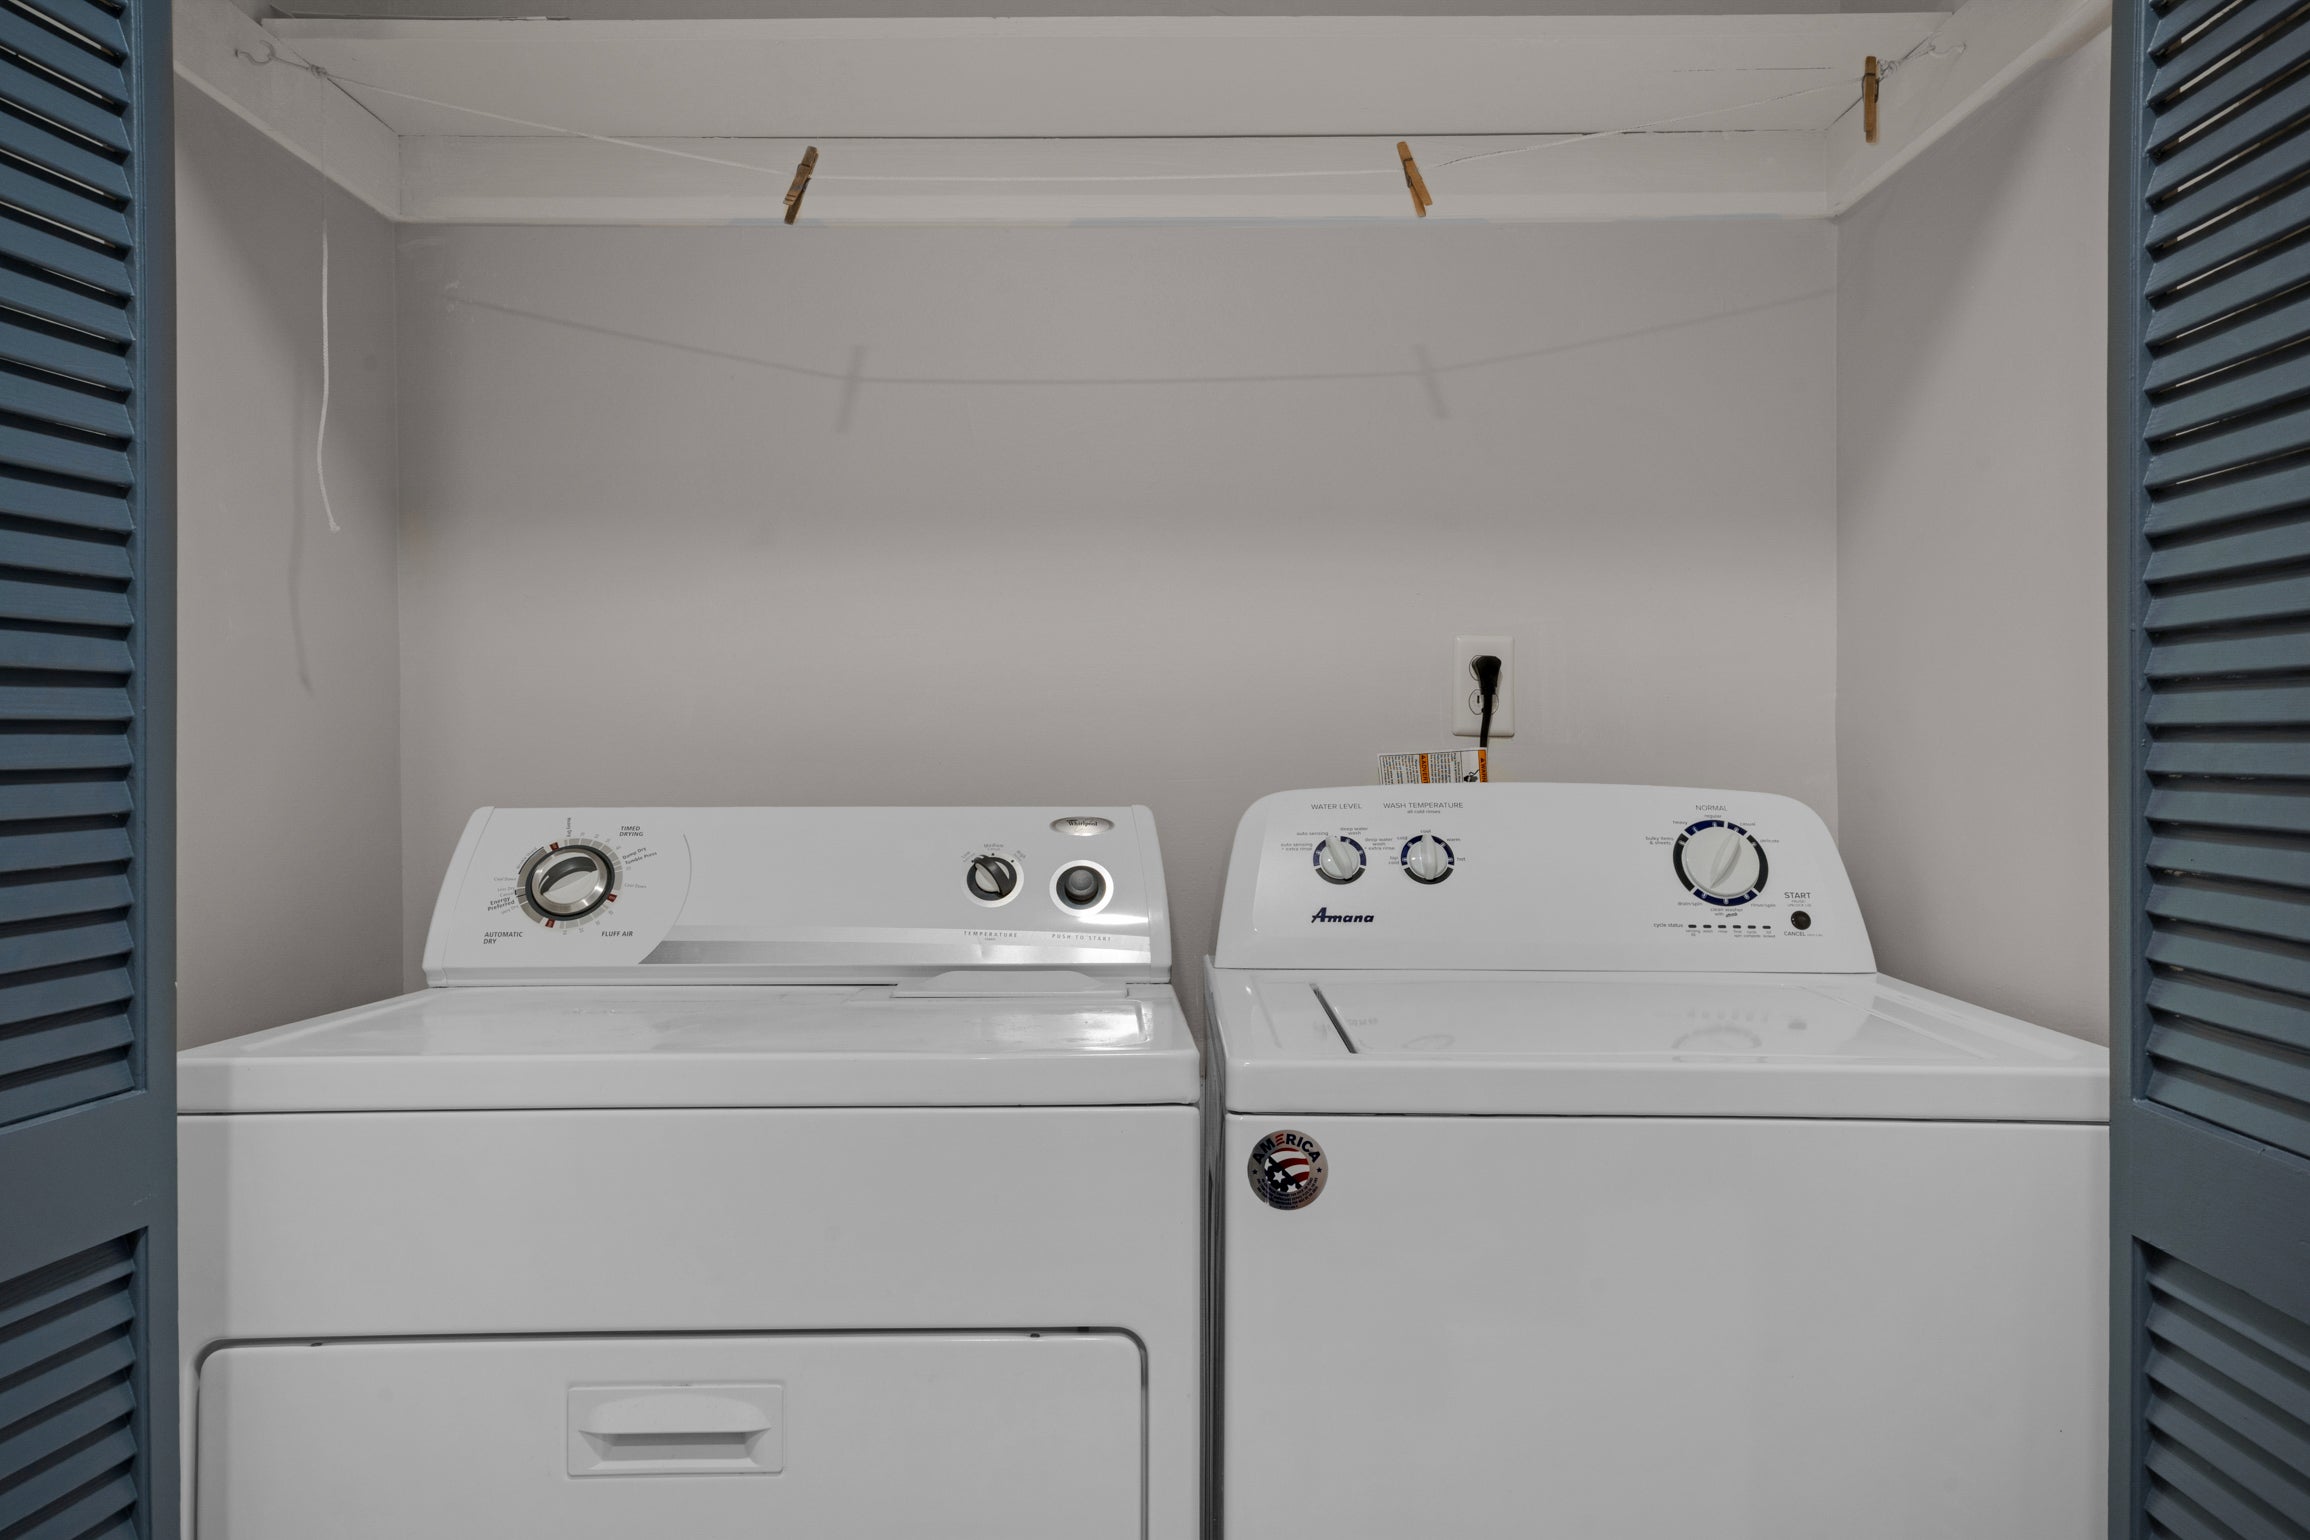 Washer and Dryer for your user